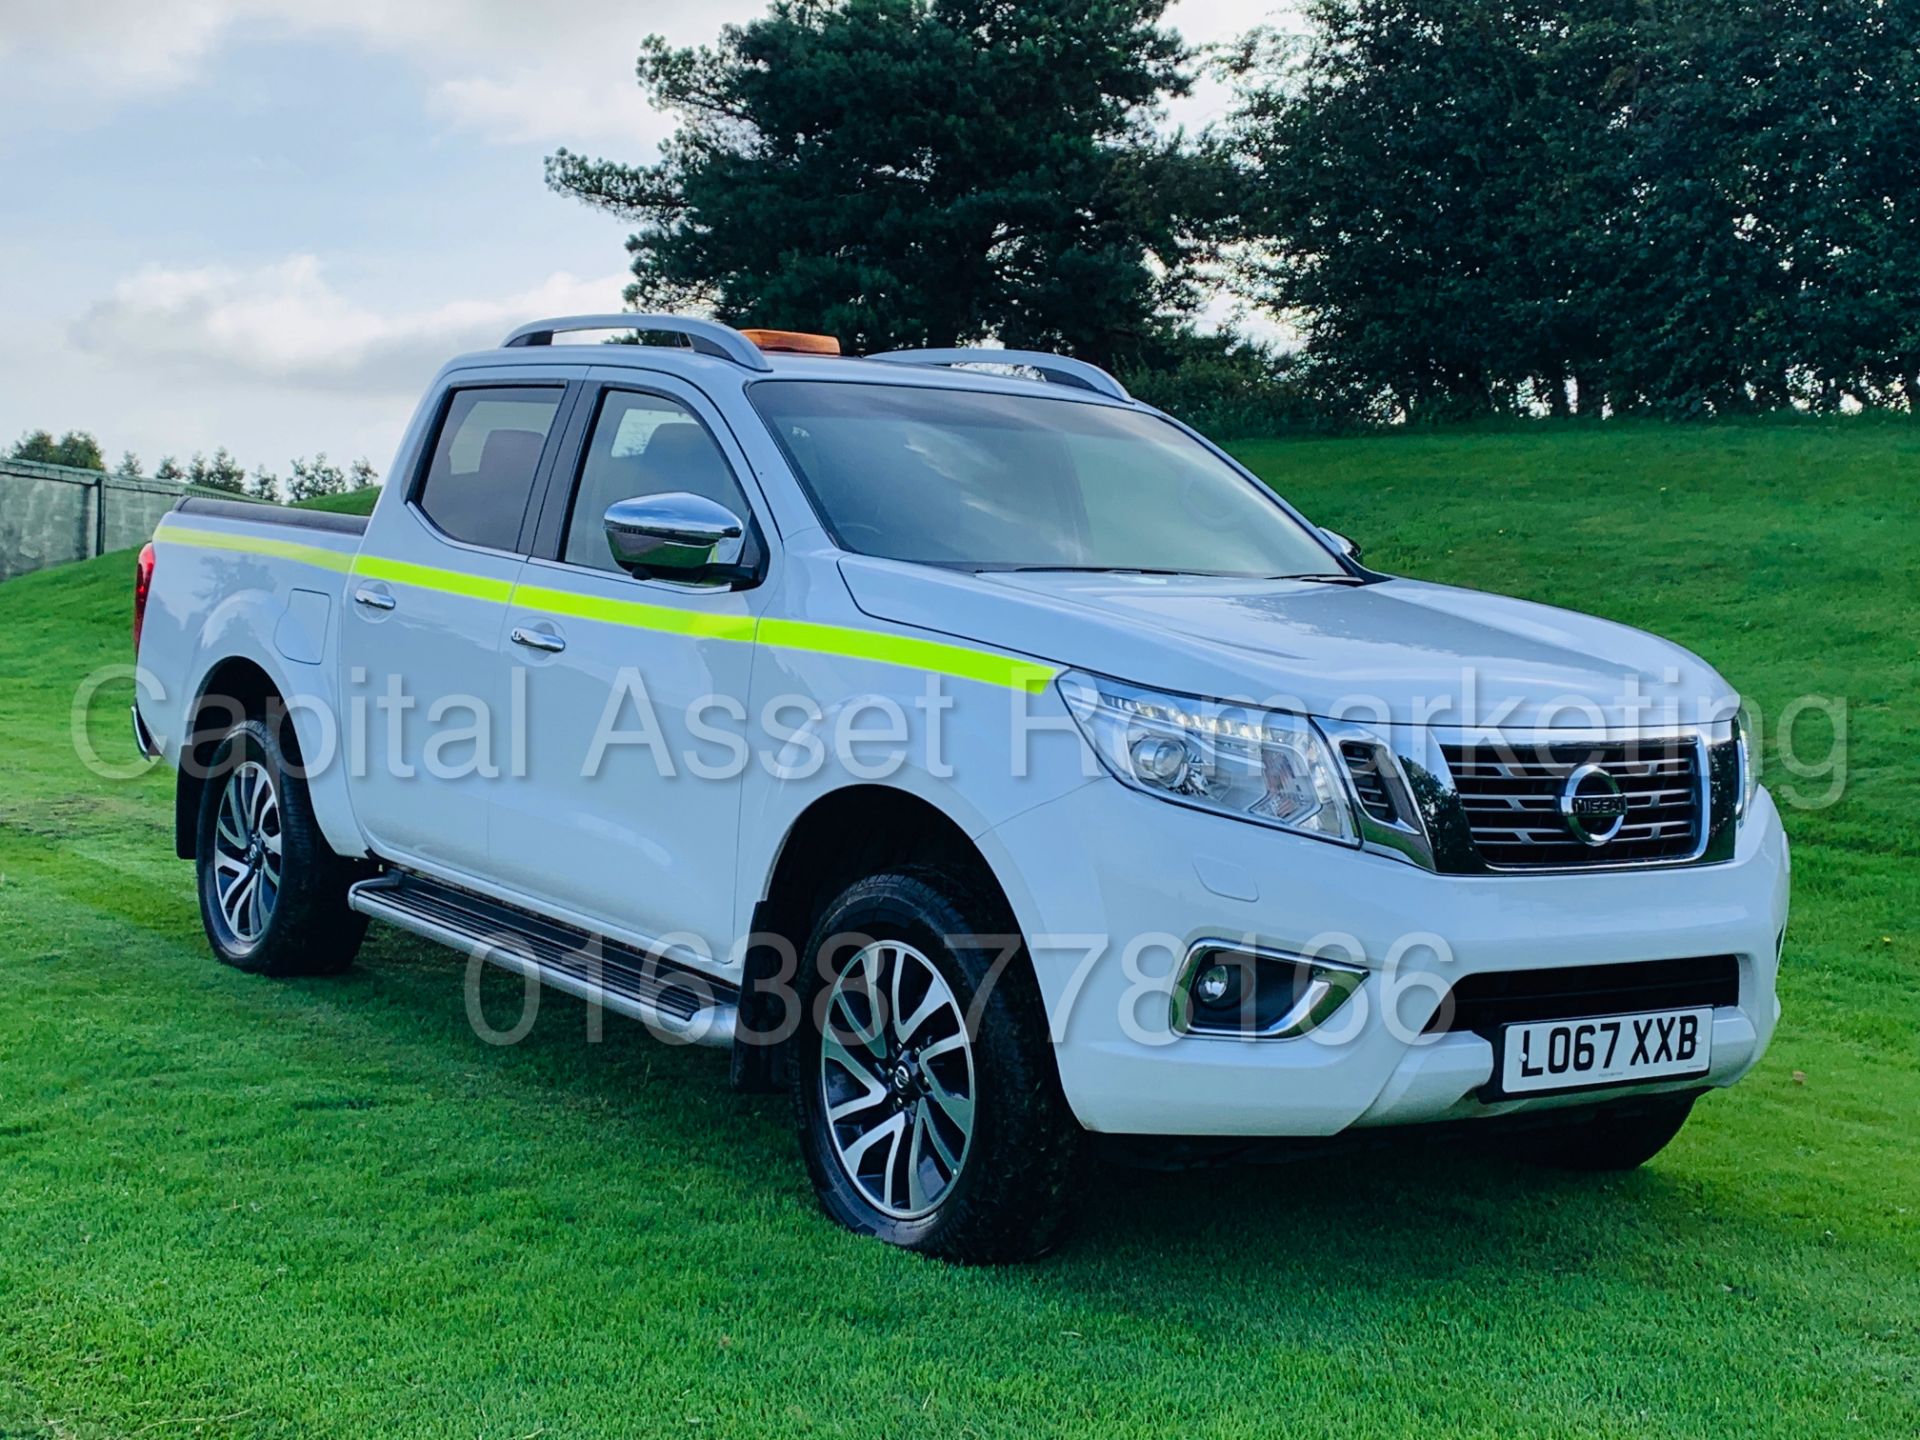 (On Sale) NISSAN NAVARA *TEKNA EDITION* DOUBLE CAB PICK-UP (67 REG) '2.3 DCI - 6 SPEED' (1 OWNER) - Image 3 of 58